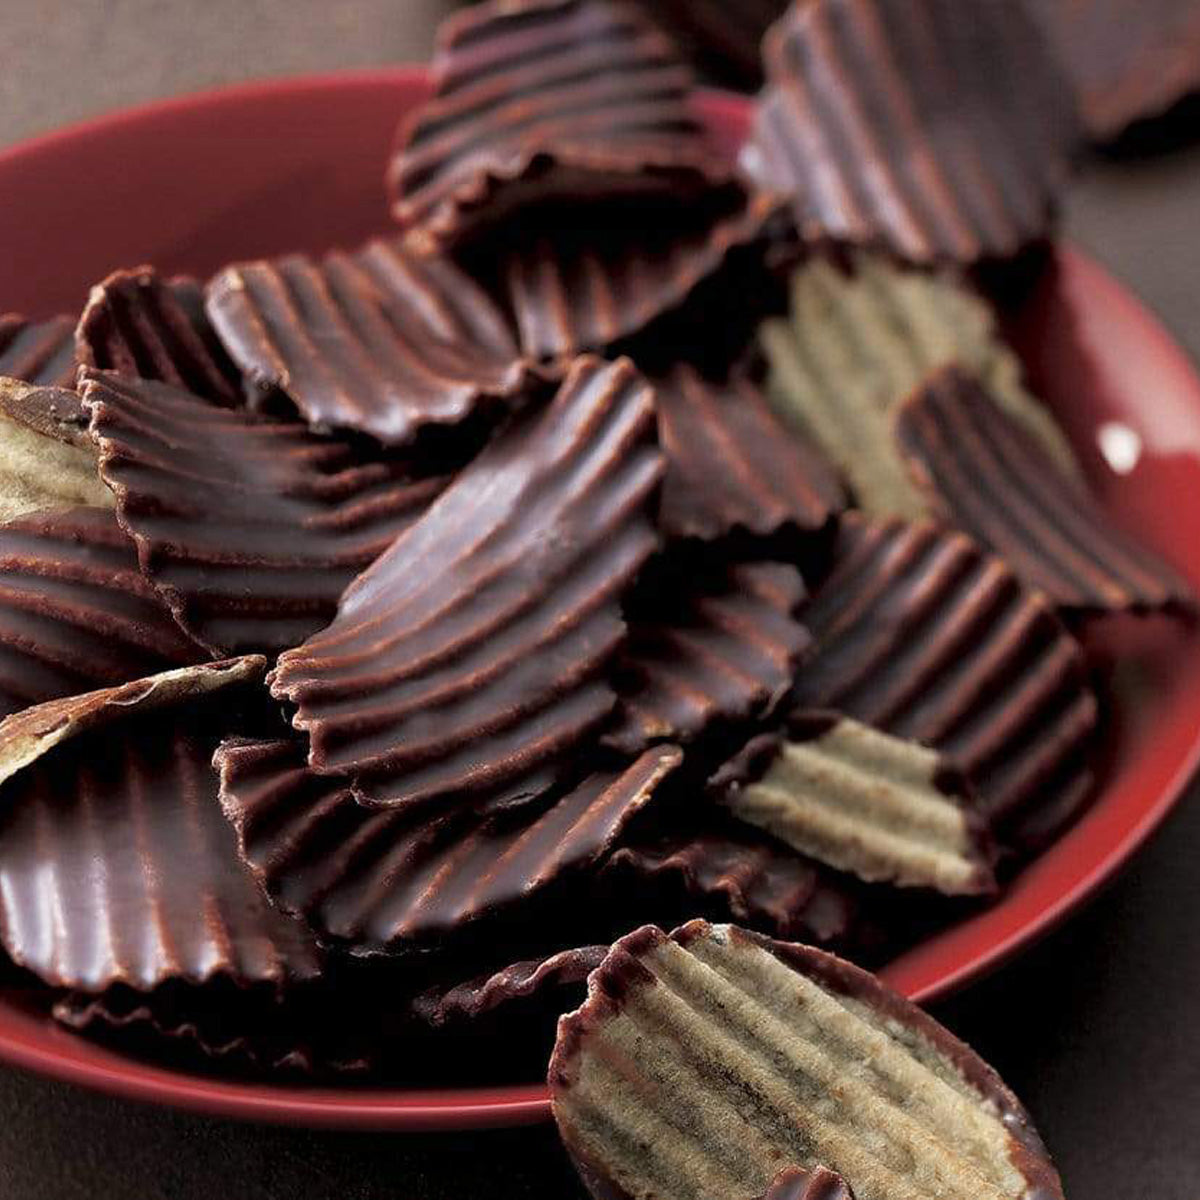 ROYCE' Chocolate - Potatochip Chocolate "Mild Bitter" - Image shows dark brown chocolate-covered potato chips with a ridged texture, as seen in a red plate. Background is in brown color.